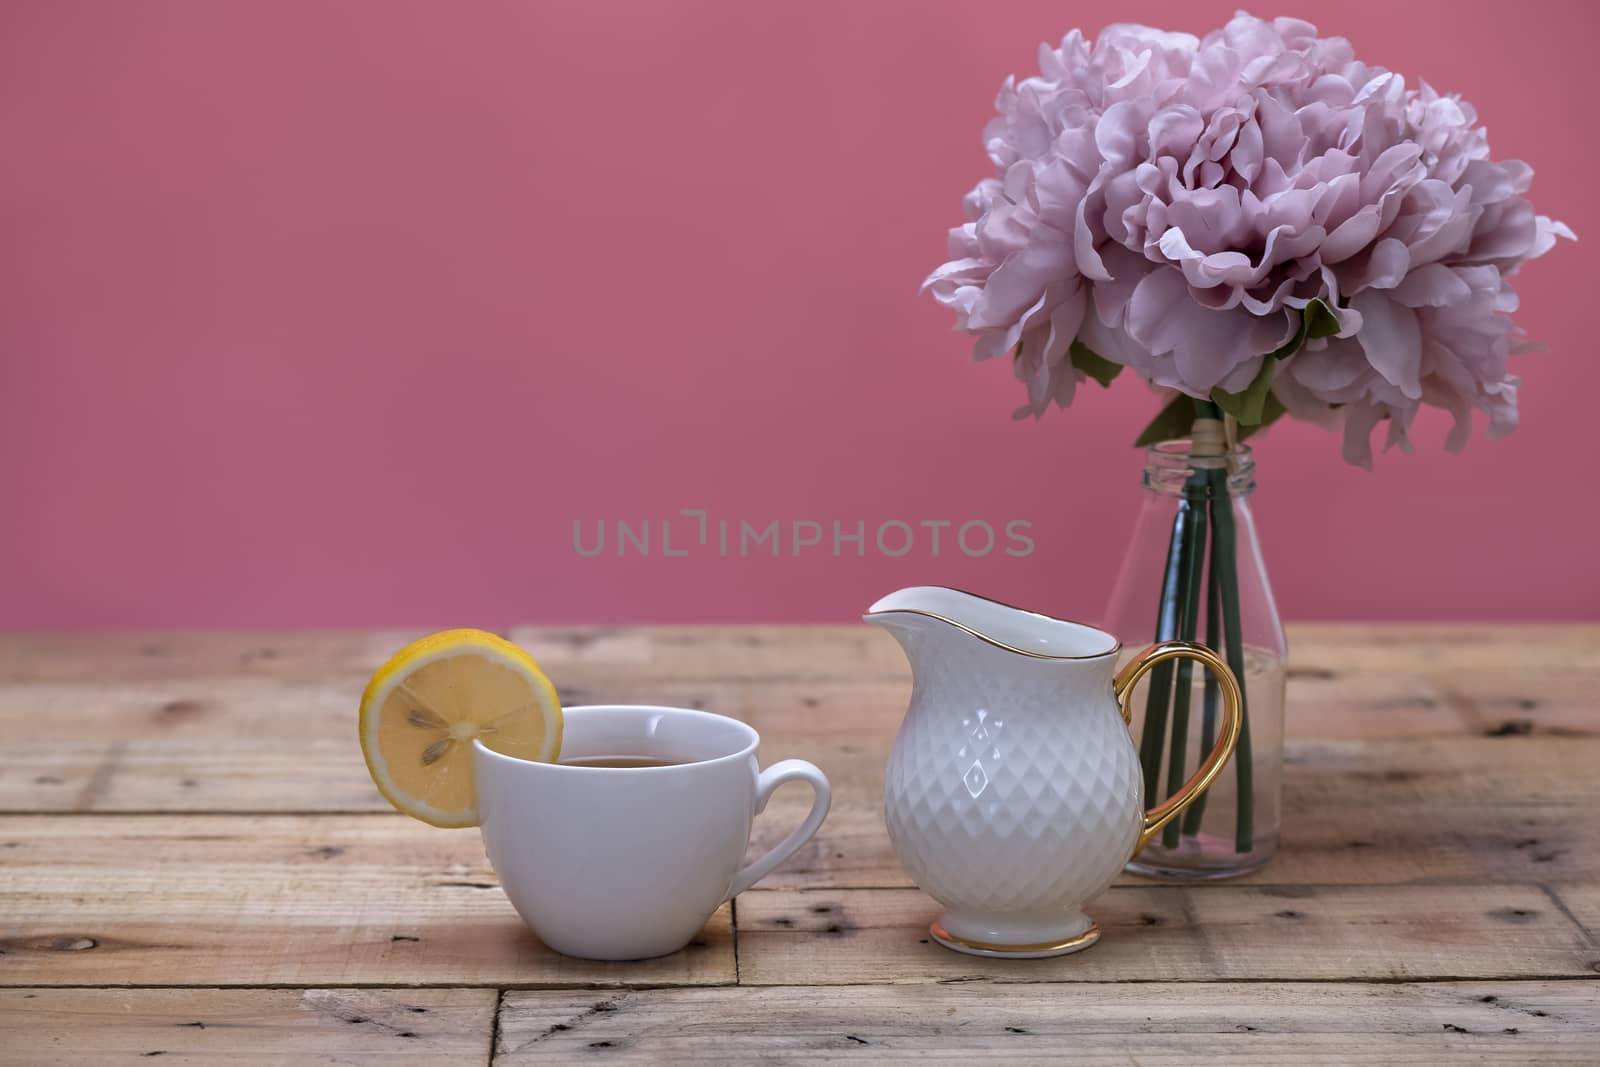 A serving of lemon tea with milk in white porcelain cup and white milk jug. Wooden table background.